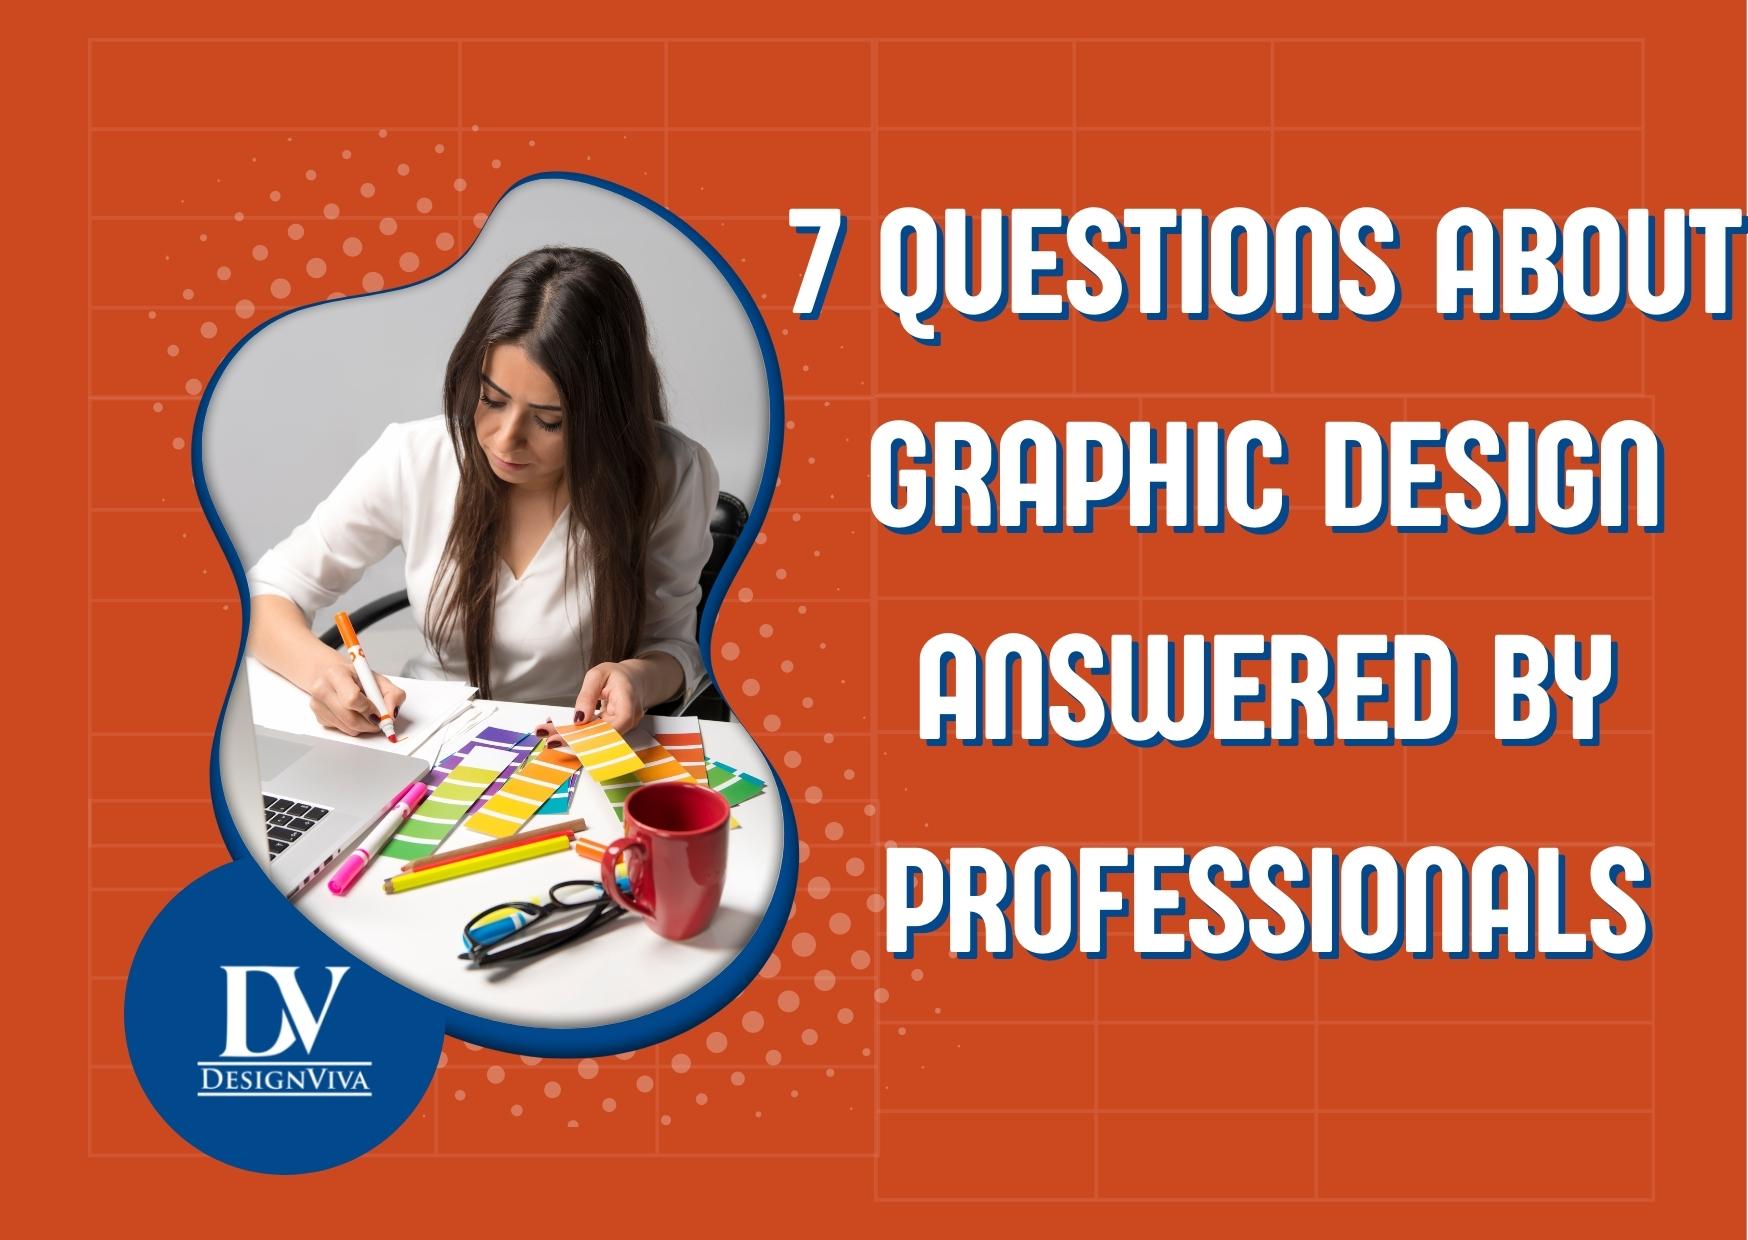 7 Questions about Graphic Design Answered by Professionals